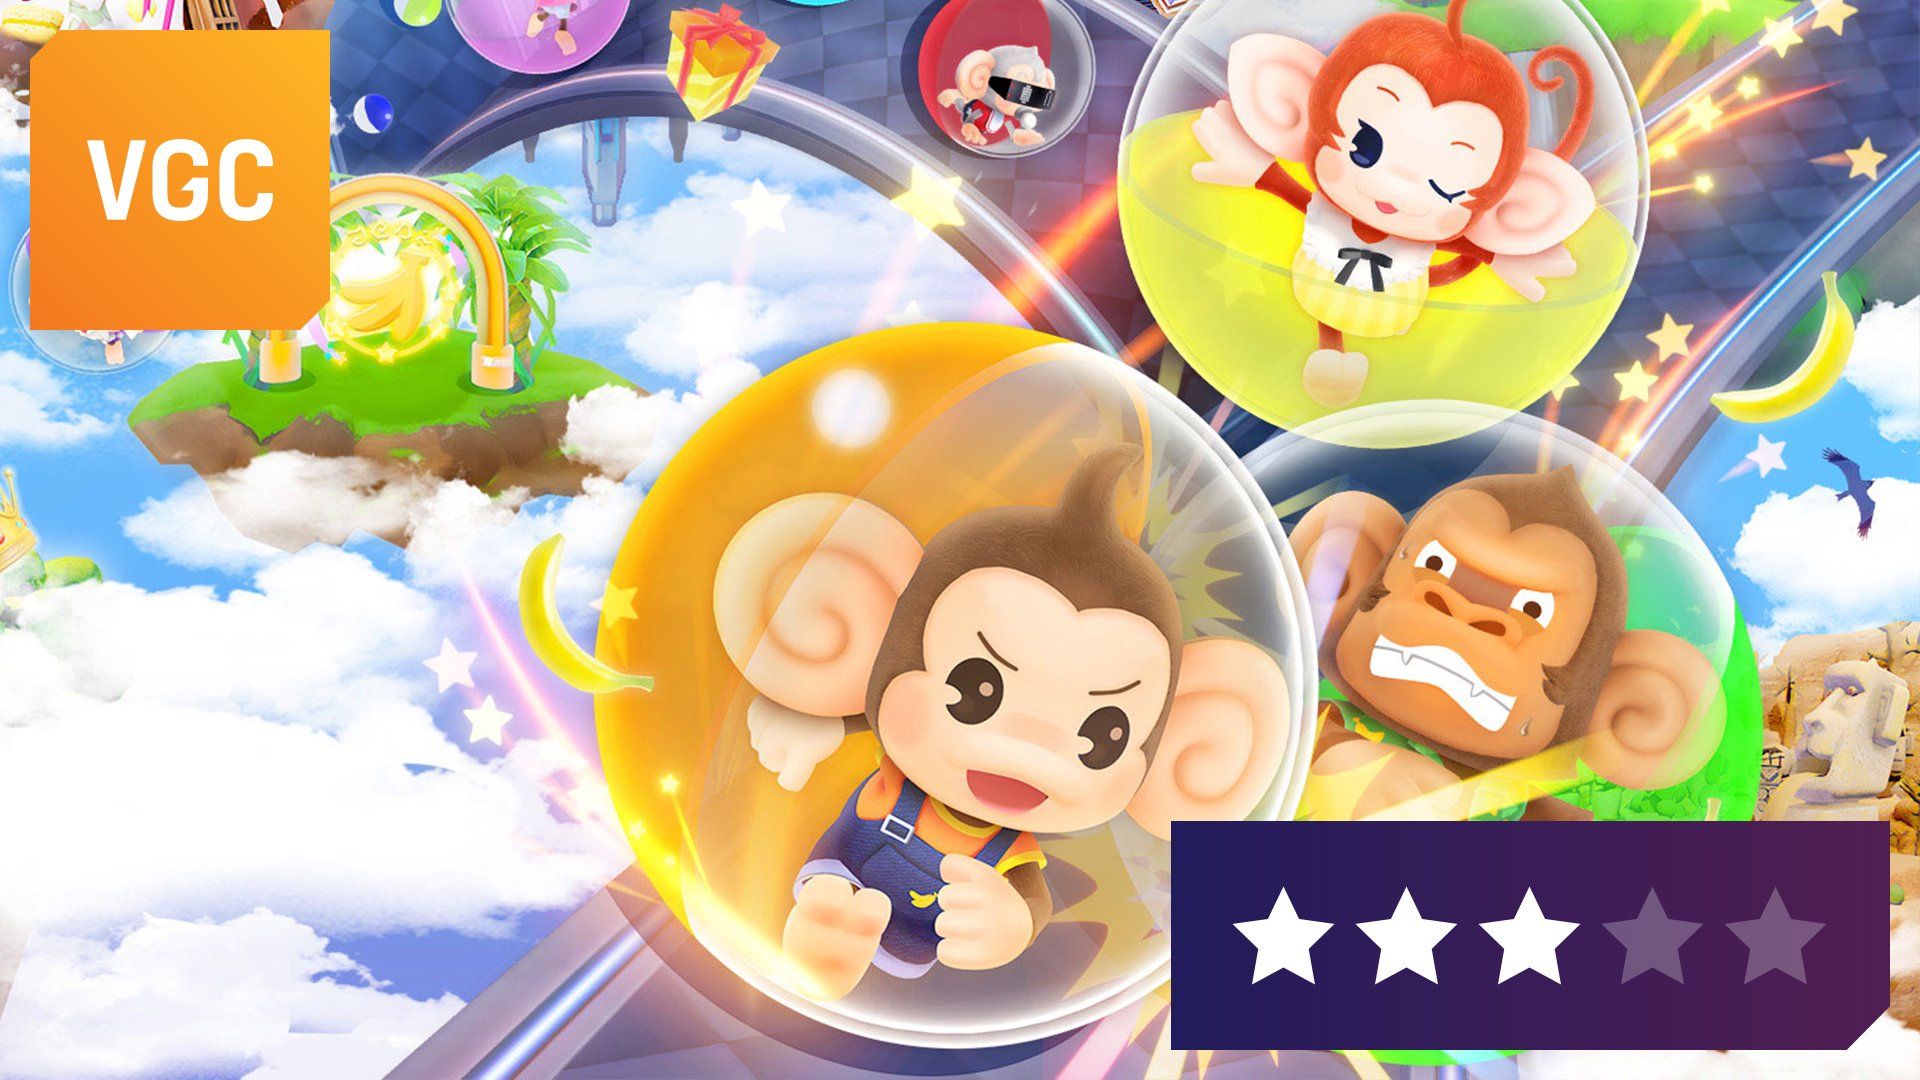 Super Monkey Ball: Banana Rumble is a welcome revival, but far from the series’ best